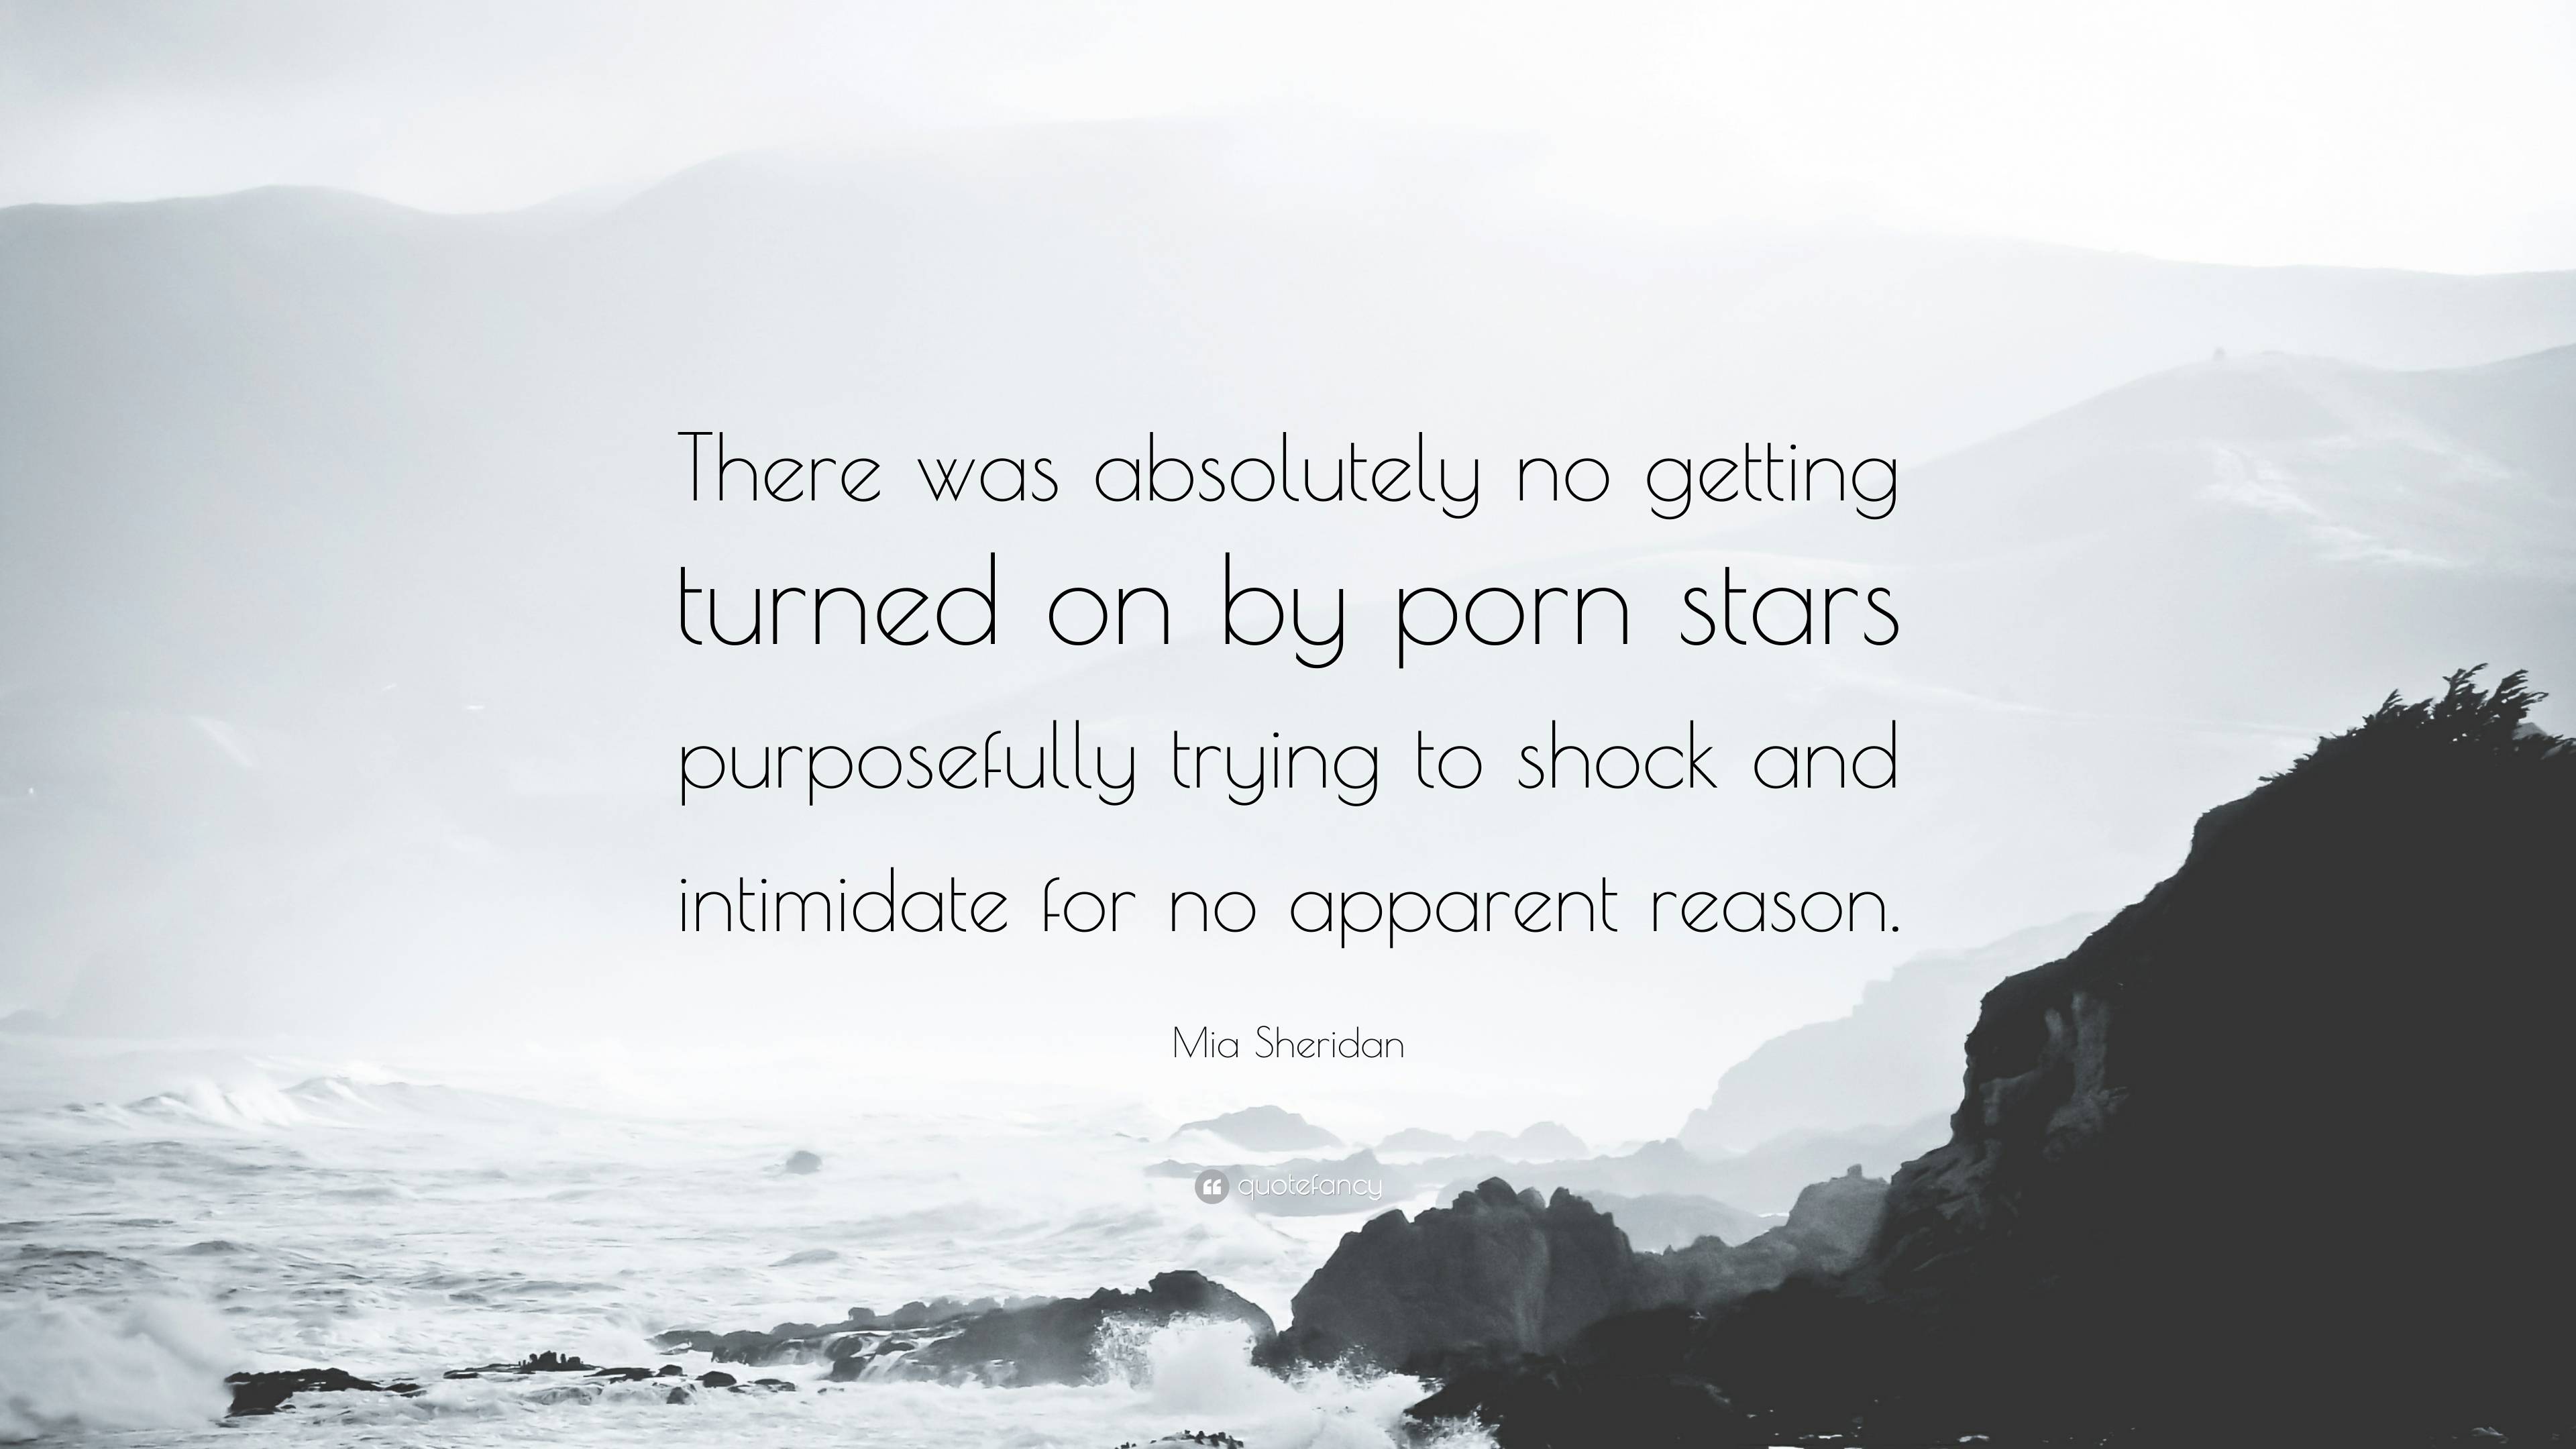 Mia Sheridan Quote: â€œThere was absolutely no getting turned on by porn  stars purposefully trying to shock and intimidate for no apparent reas...â€